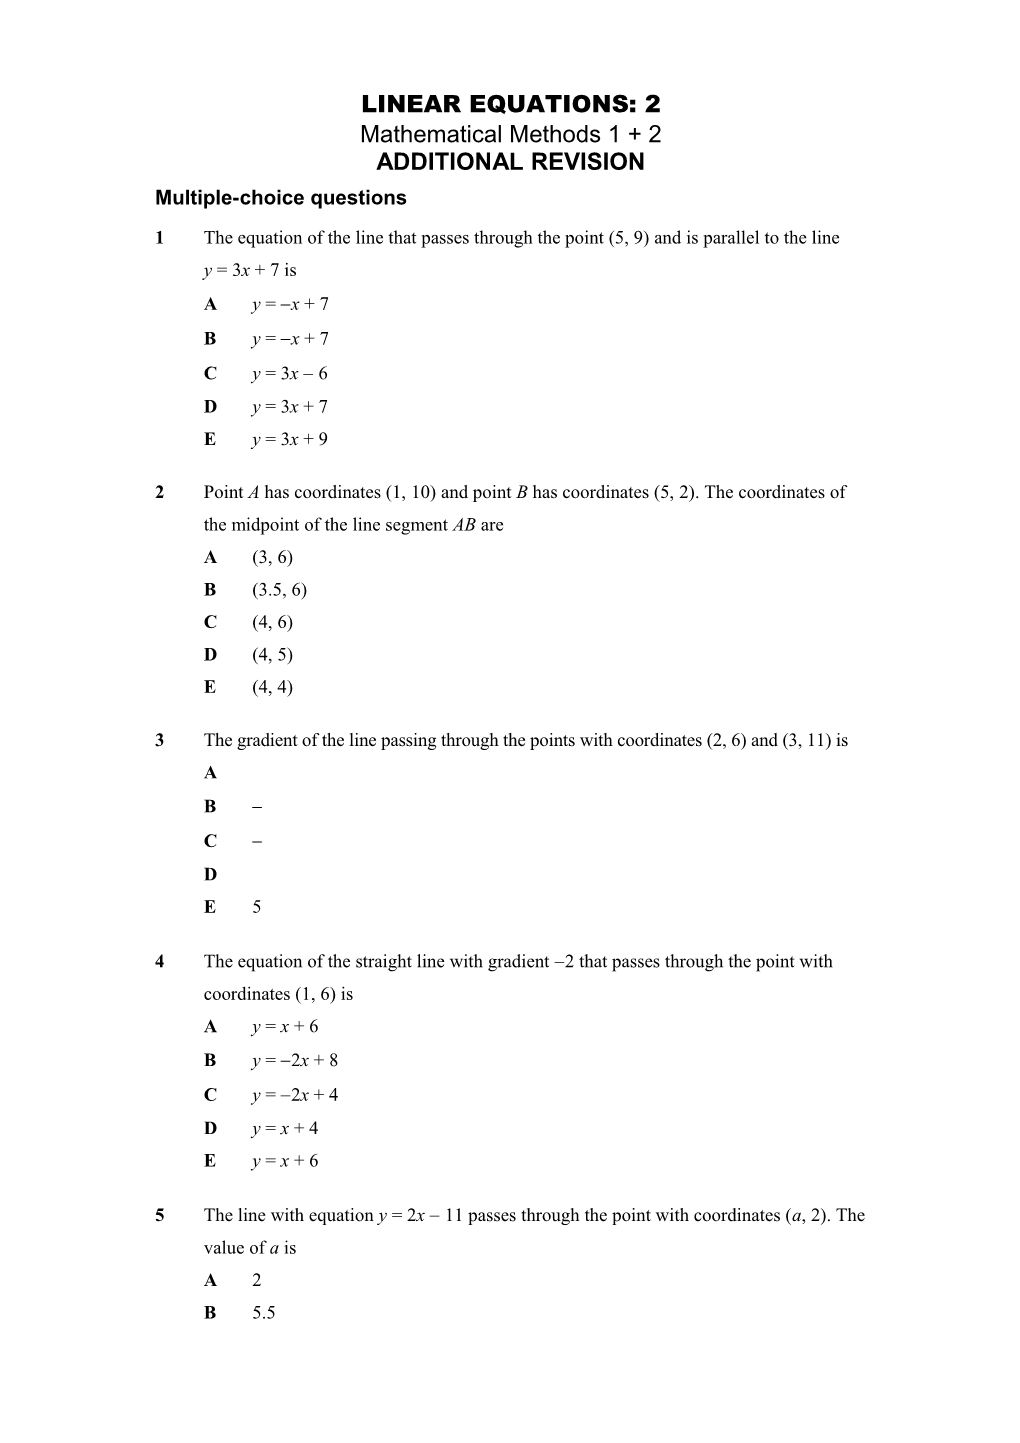 Linera Equations Multiple-Choice Questions